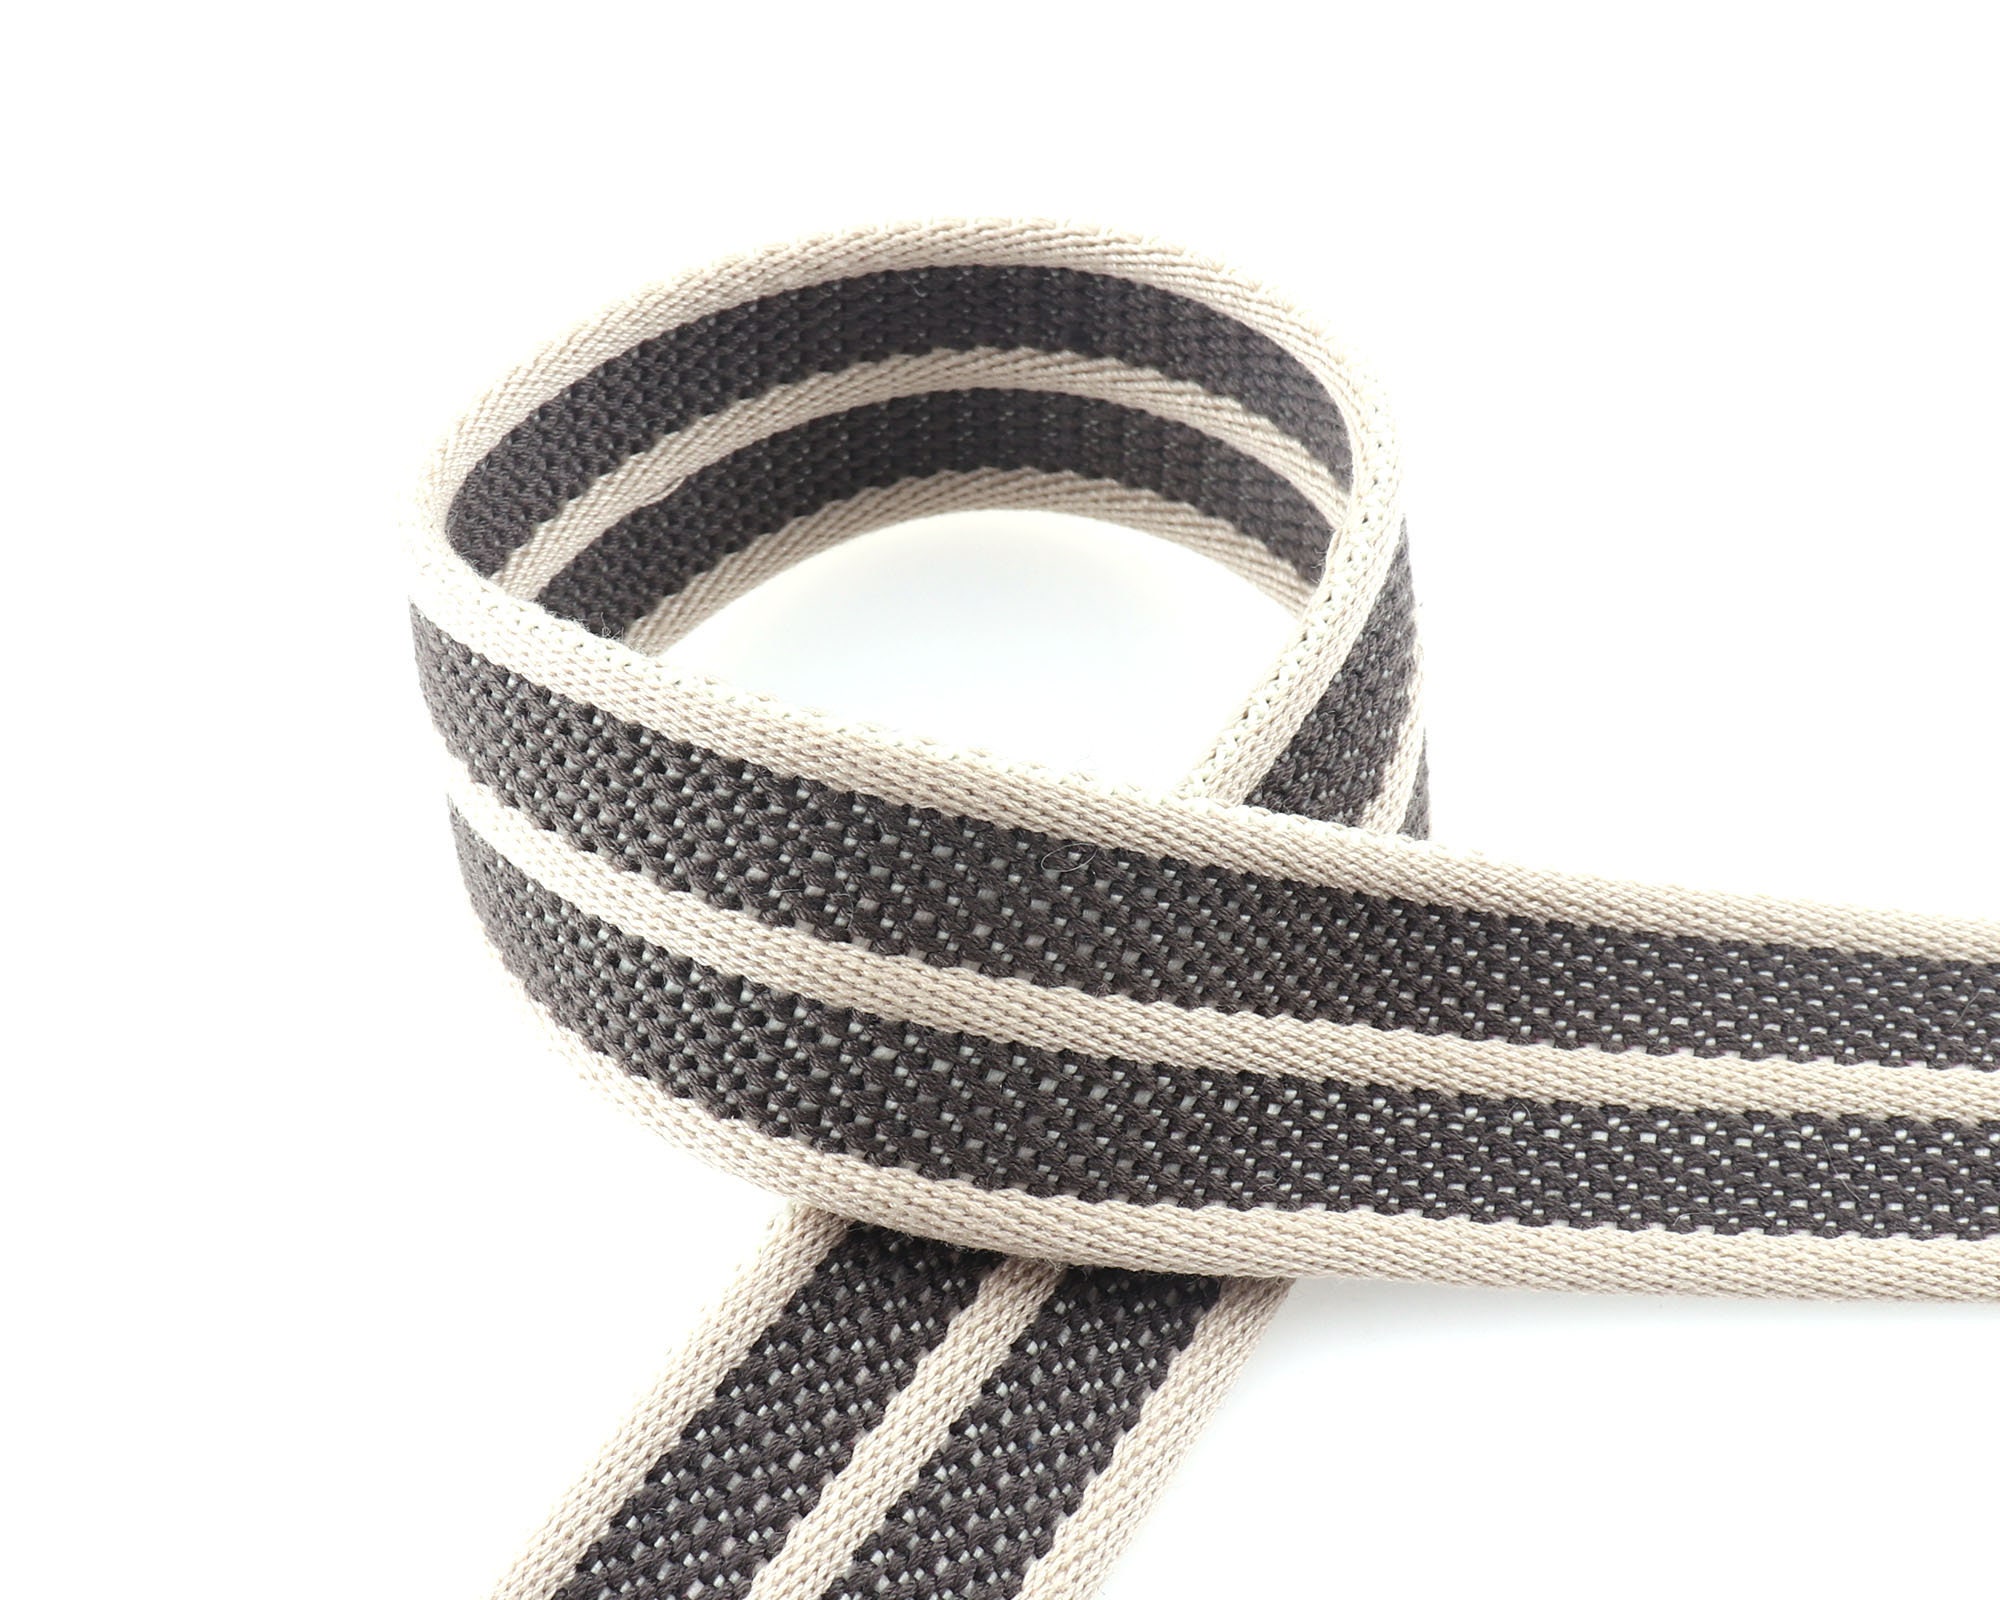 Yo Yo Cotton Webbing 1.5 inch 15 Yards Mediumweight Polyester Cotton Webbing Strap for Cloth Tote Bags Leash Straps Crafts Outdoor Accessories (1.5